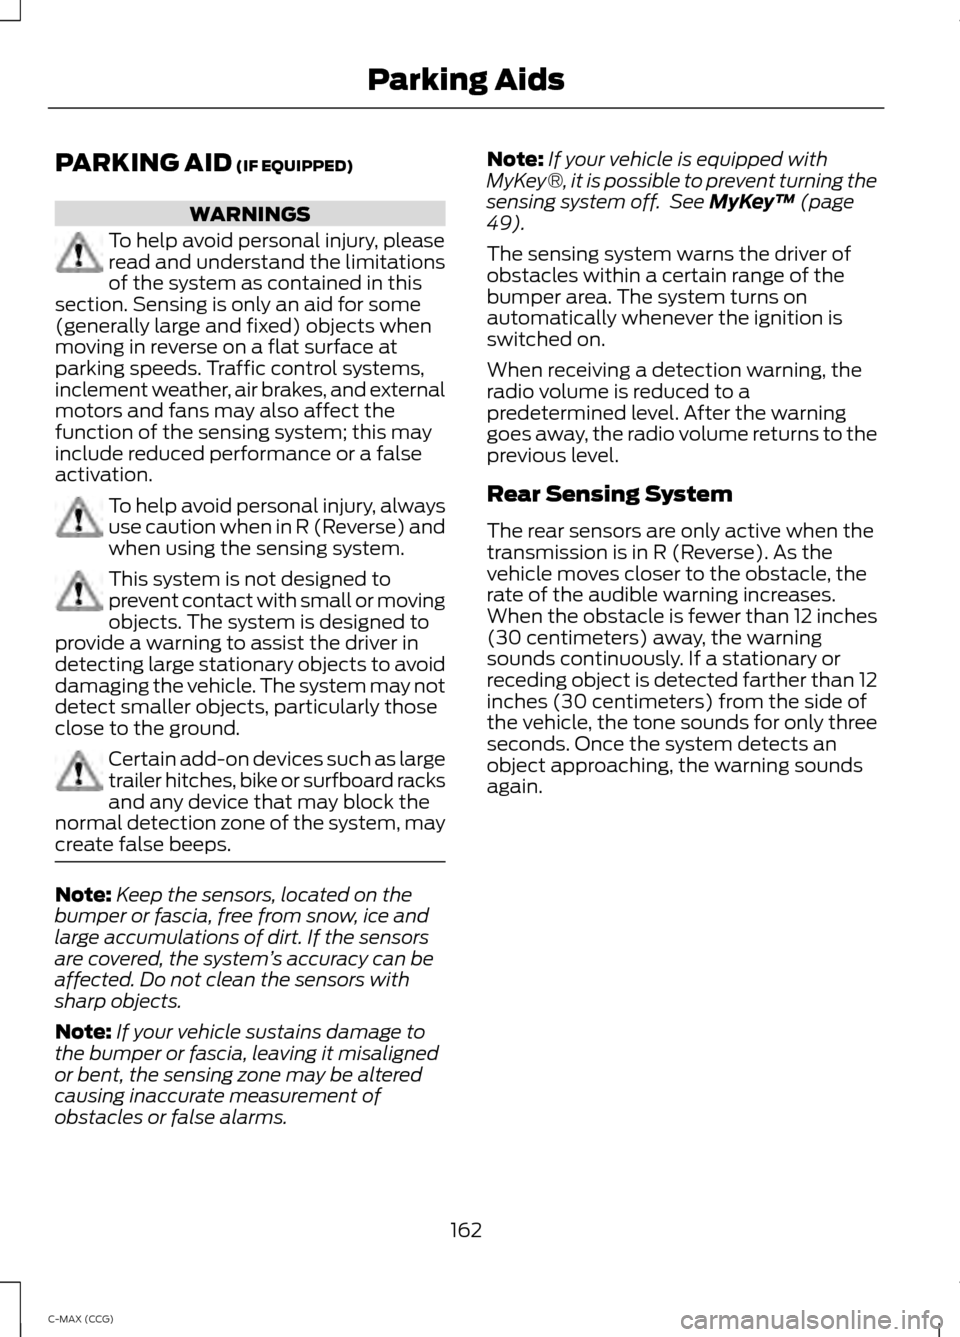 FORD C MAX HYBRID 2014 2.G Owners Manual PARKING AID (IF EQUIPPED)
WARNINGS
To help avoid personal injury, please
read and understand the limitations
of the system as contained in this
section. Sensing is only an aid for some
(generally larg